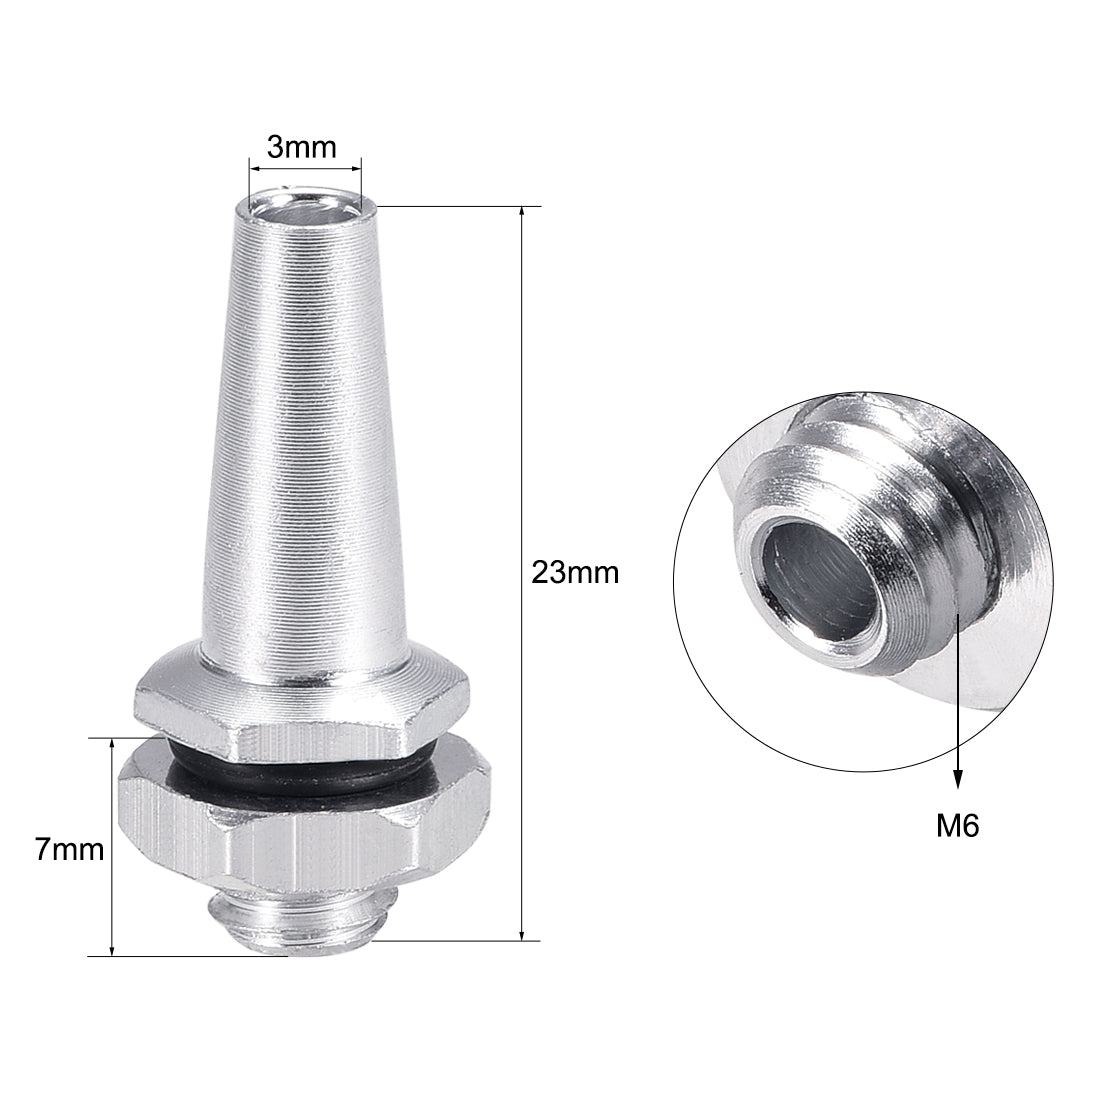 uxcell Uxcell RC Antenna Mount, M6 Thread, Aluminum Alloy, for RC Boat Silver